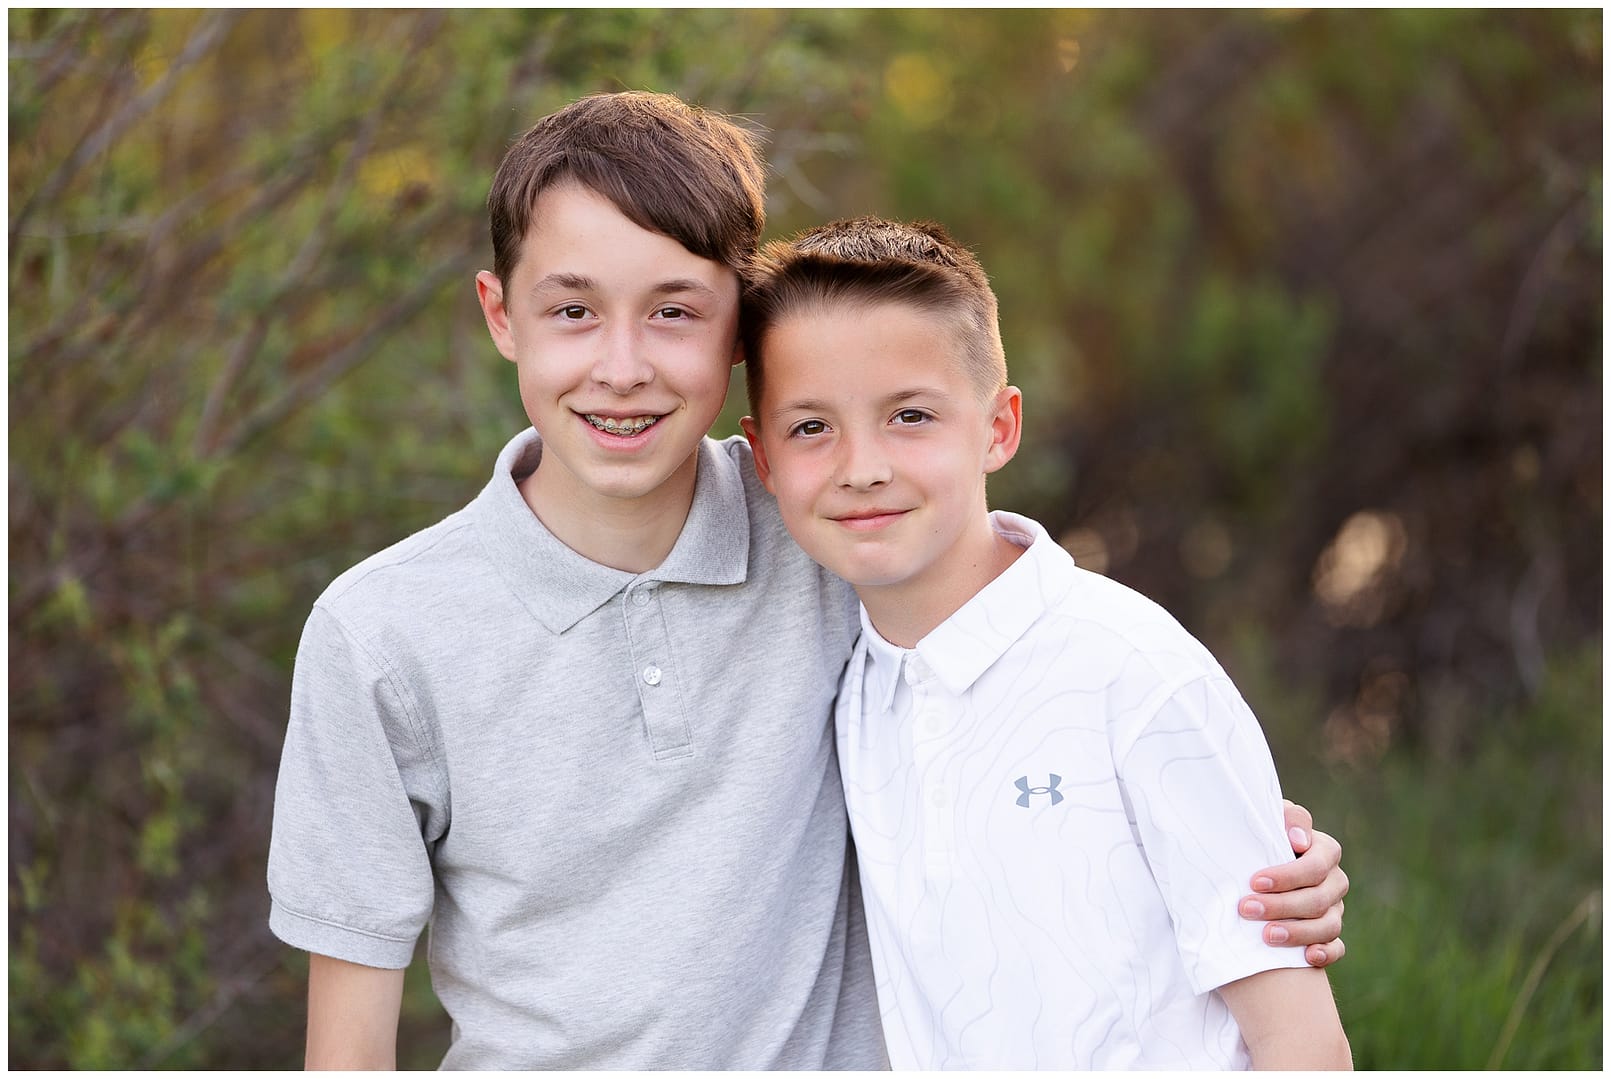 Brothers pose for Boise family photos. Photos by Tiffany Hix Photography.